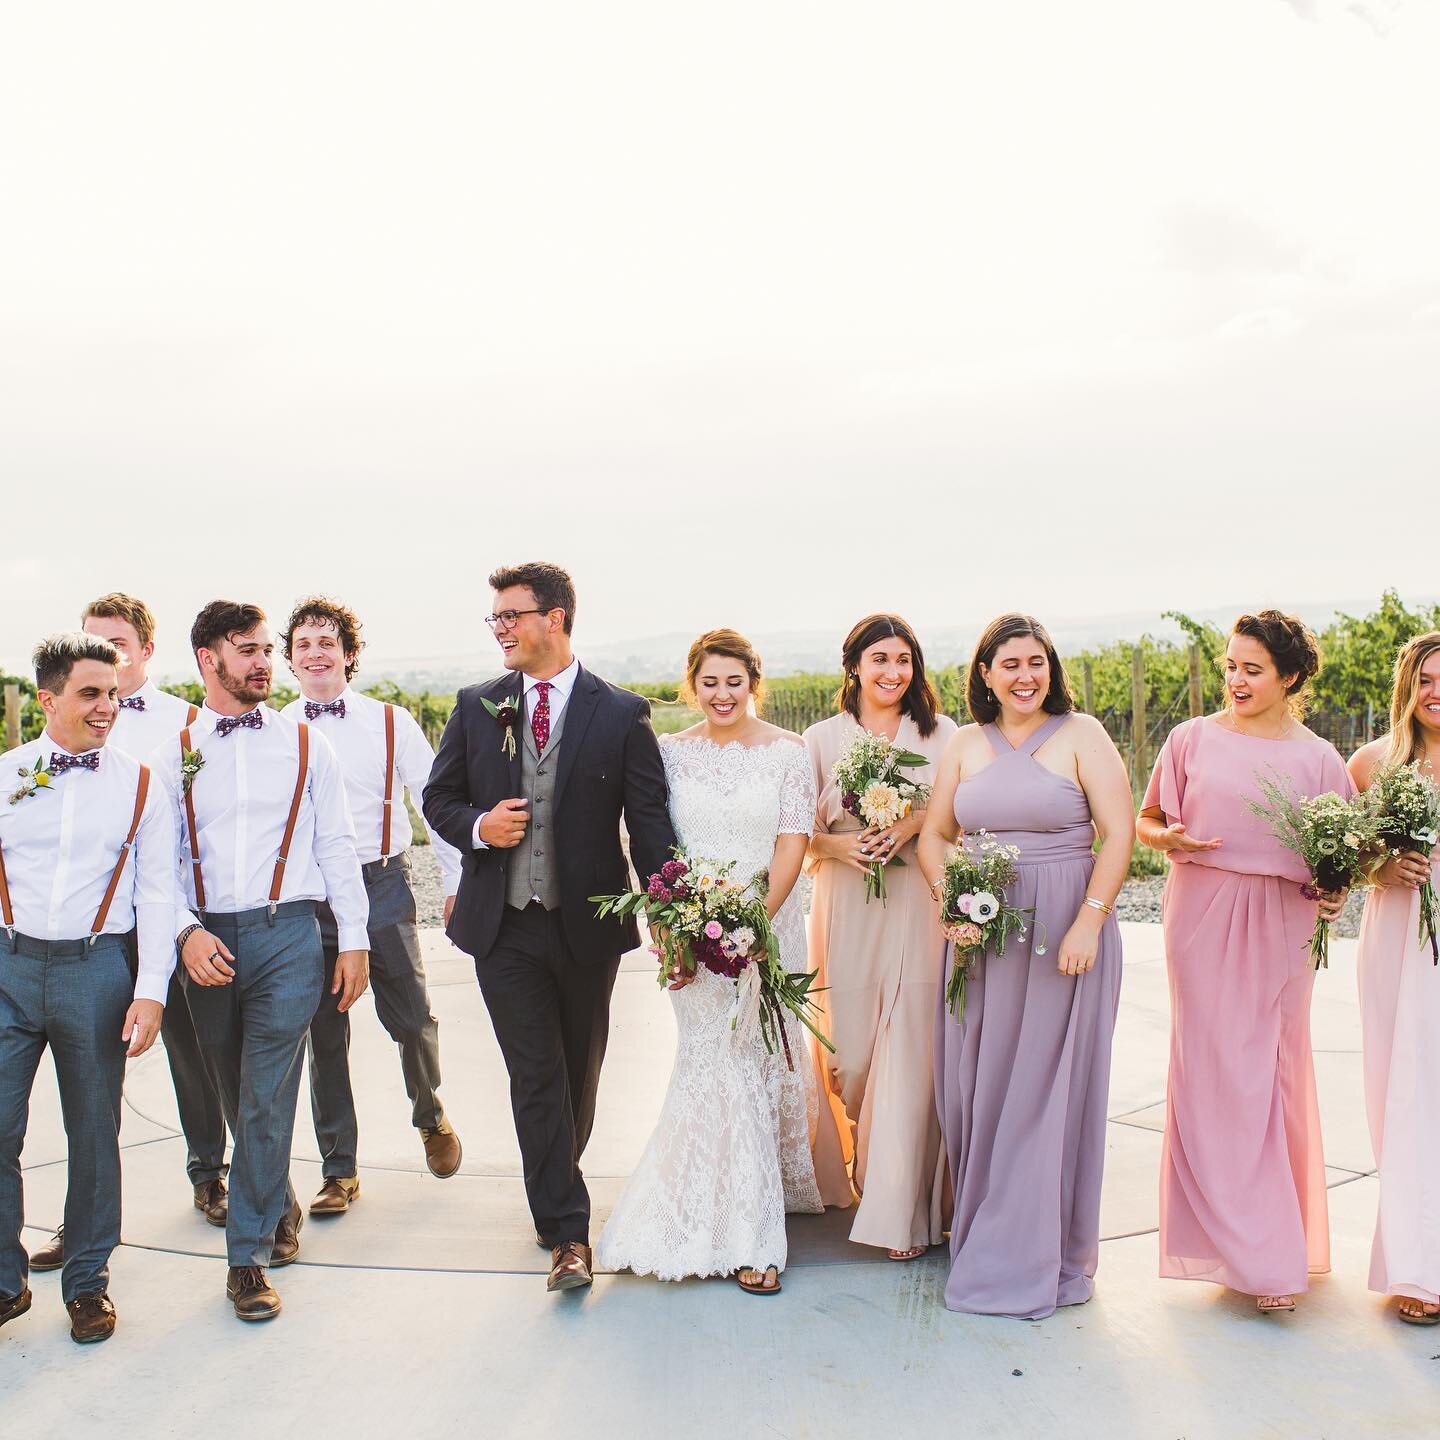 Can confirm- I am still not over the vineyard pics. Don&rsquo;t see how I ever could be!! 💛